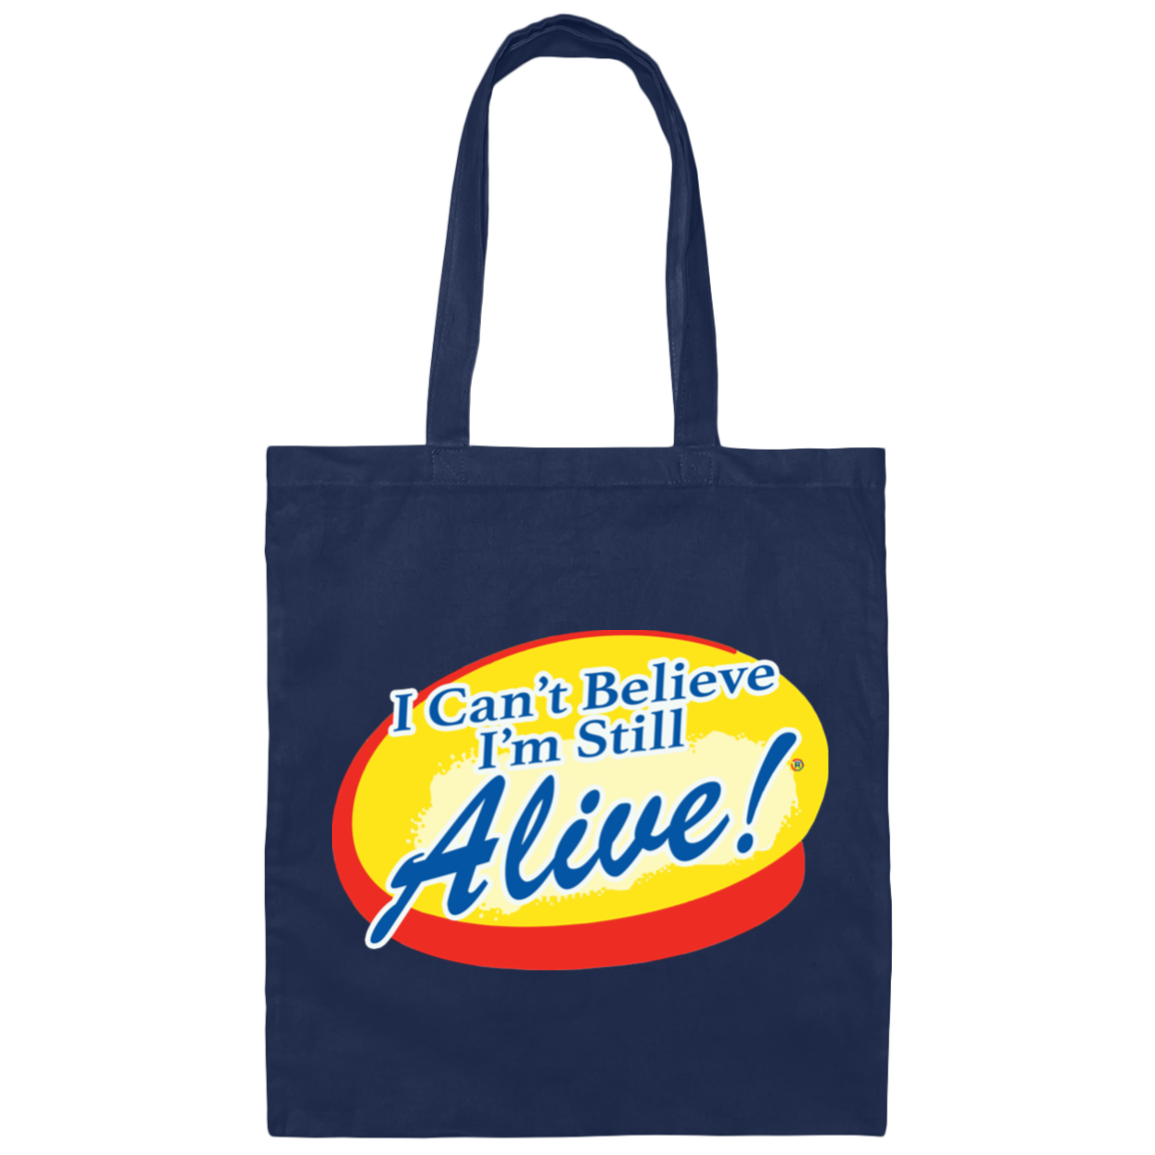 I Can't Believe I'm Still Alive! Canvas Tote Bag